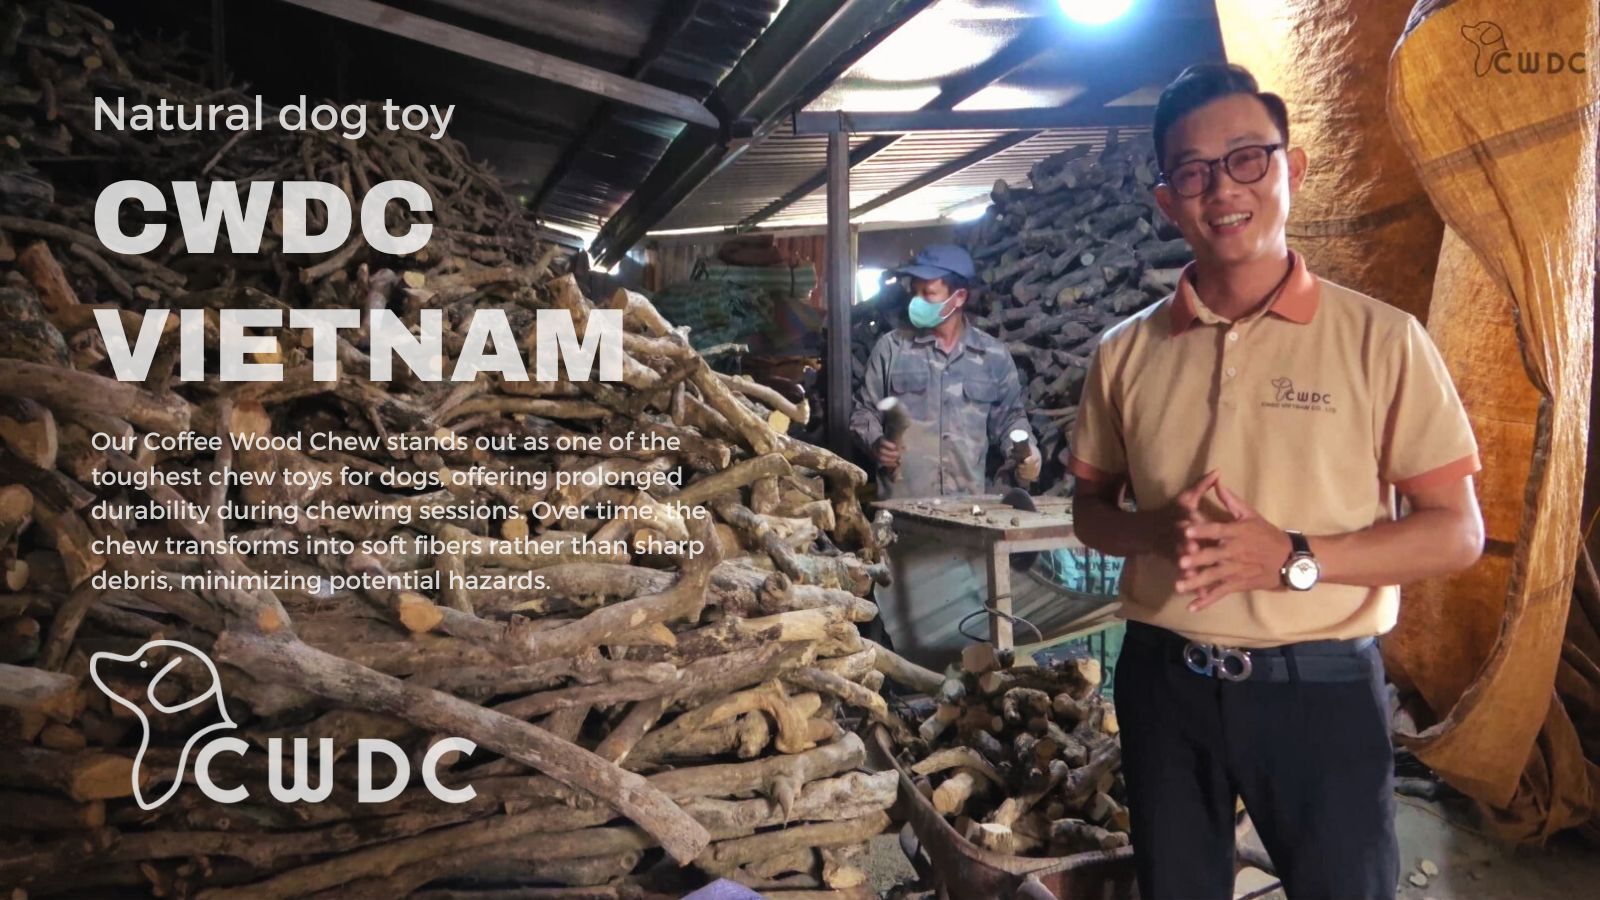 introducing-the-coffee-wood-rope-toy-a-unique-product-line-crafted-by-cwdc-vietnam-blog